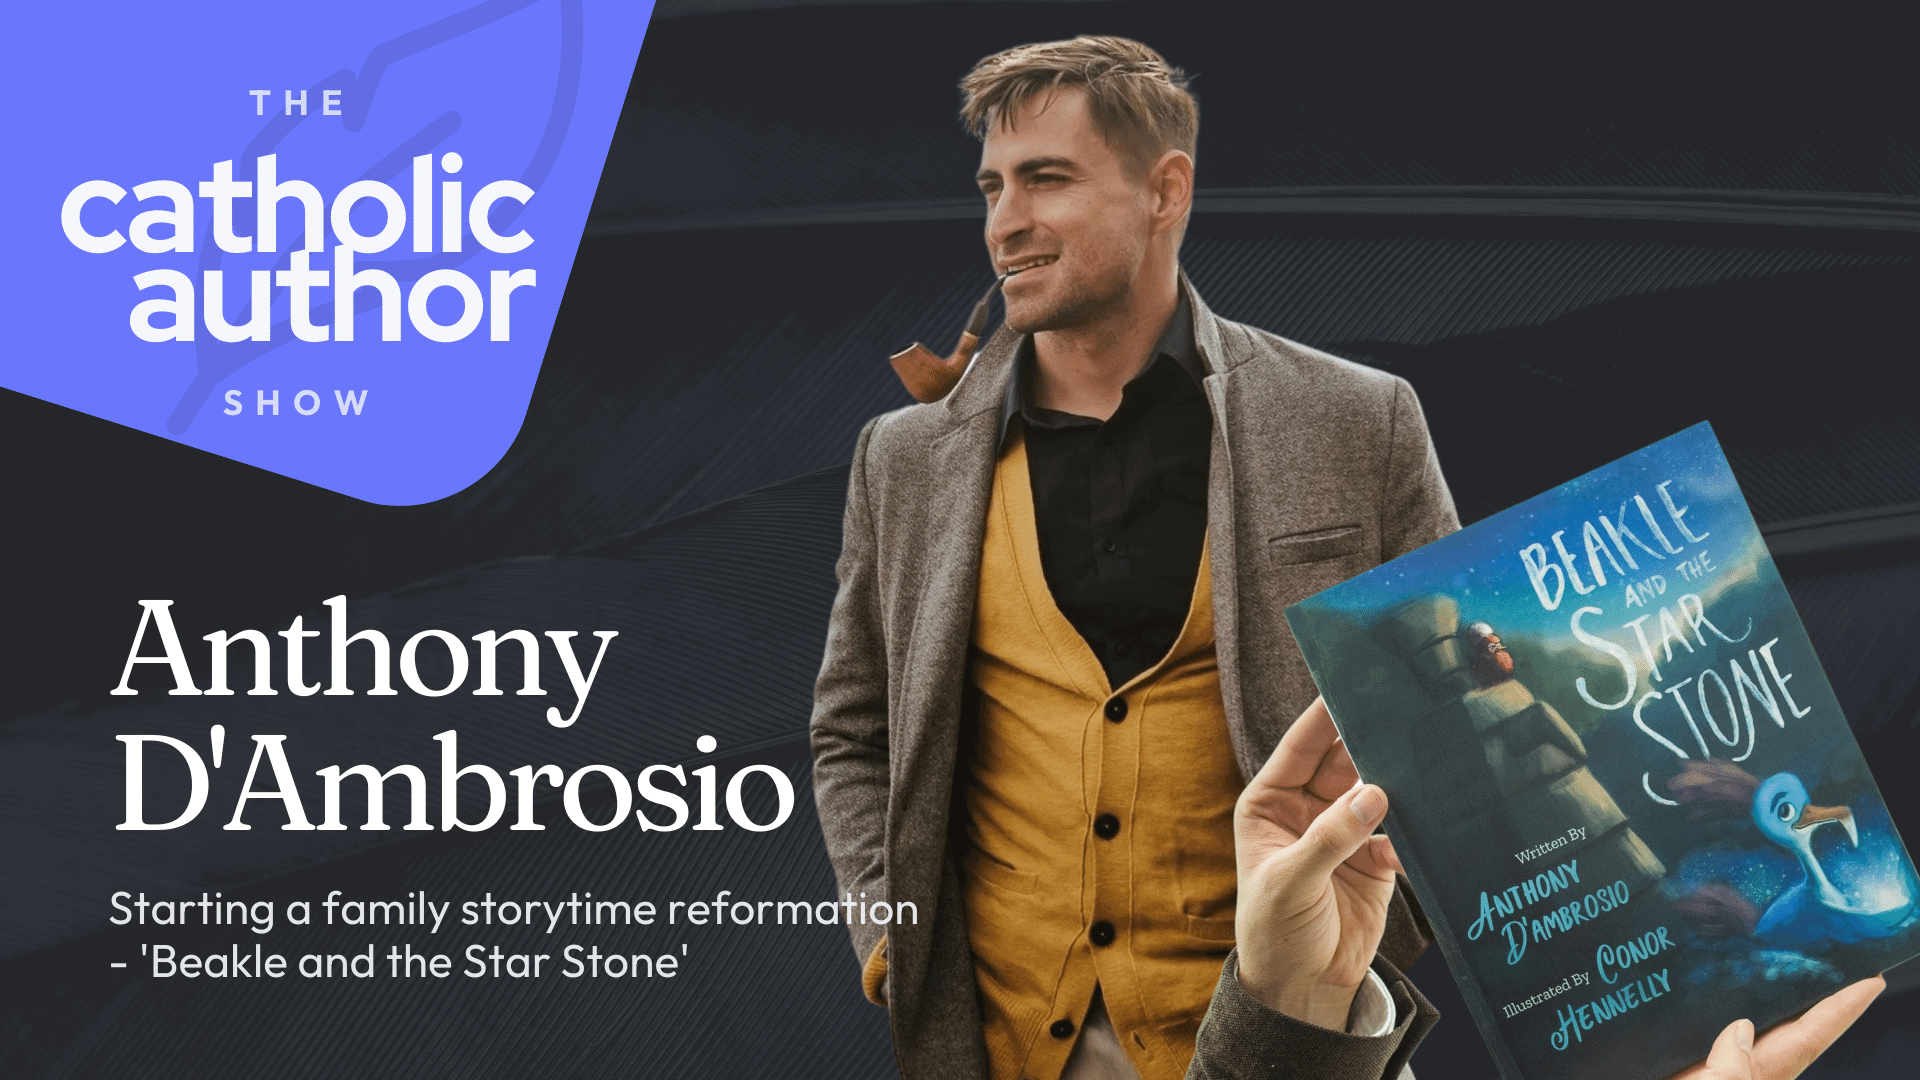 Starting a family storytime reformation – ‘Beakle and the Star Stone’ with Anthony D’Ambrosio